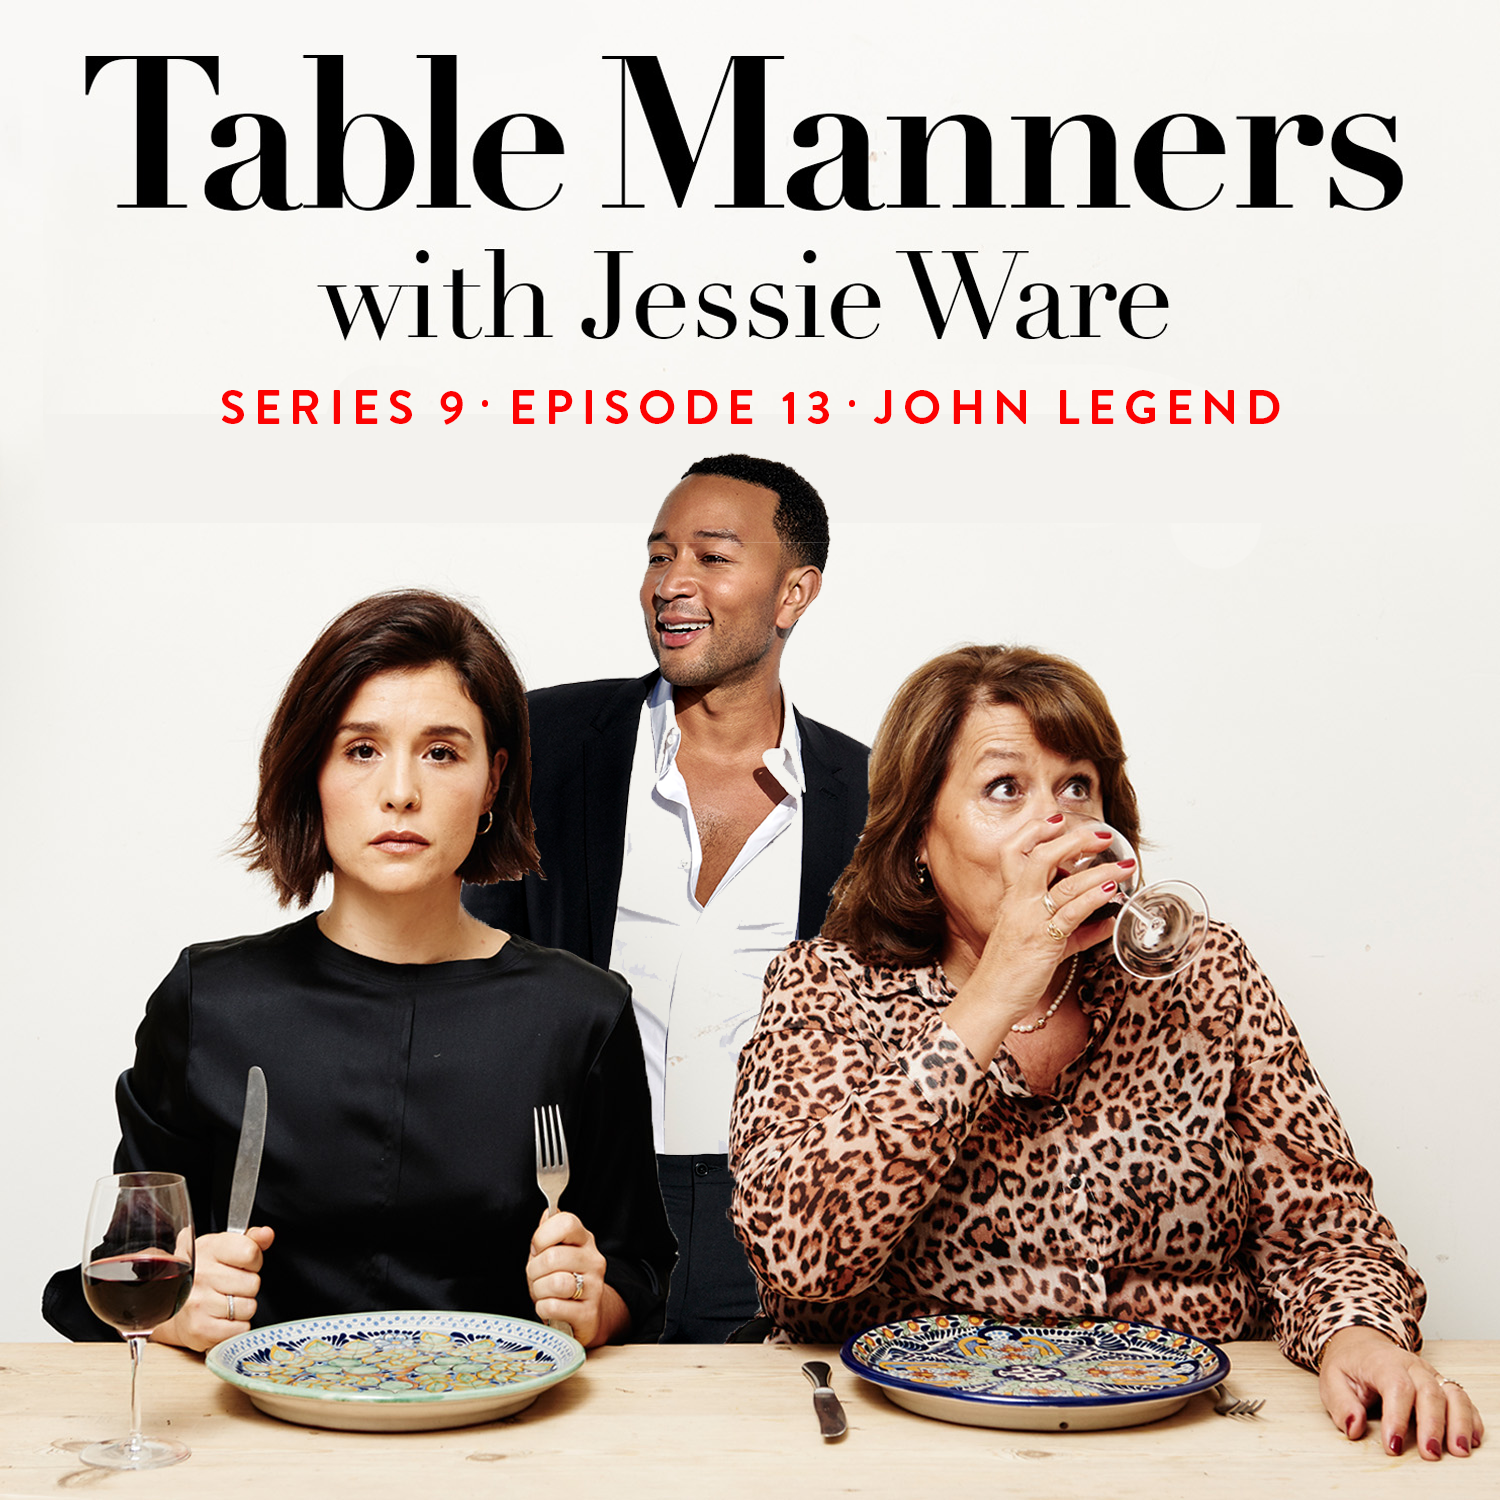 6) Table Manners with Jessie Ware